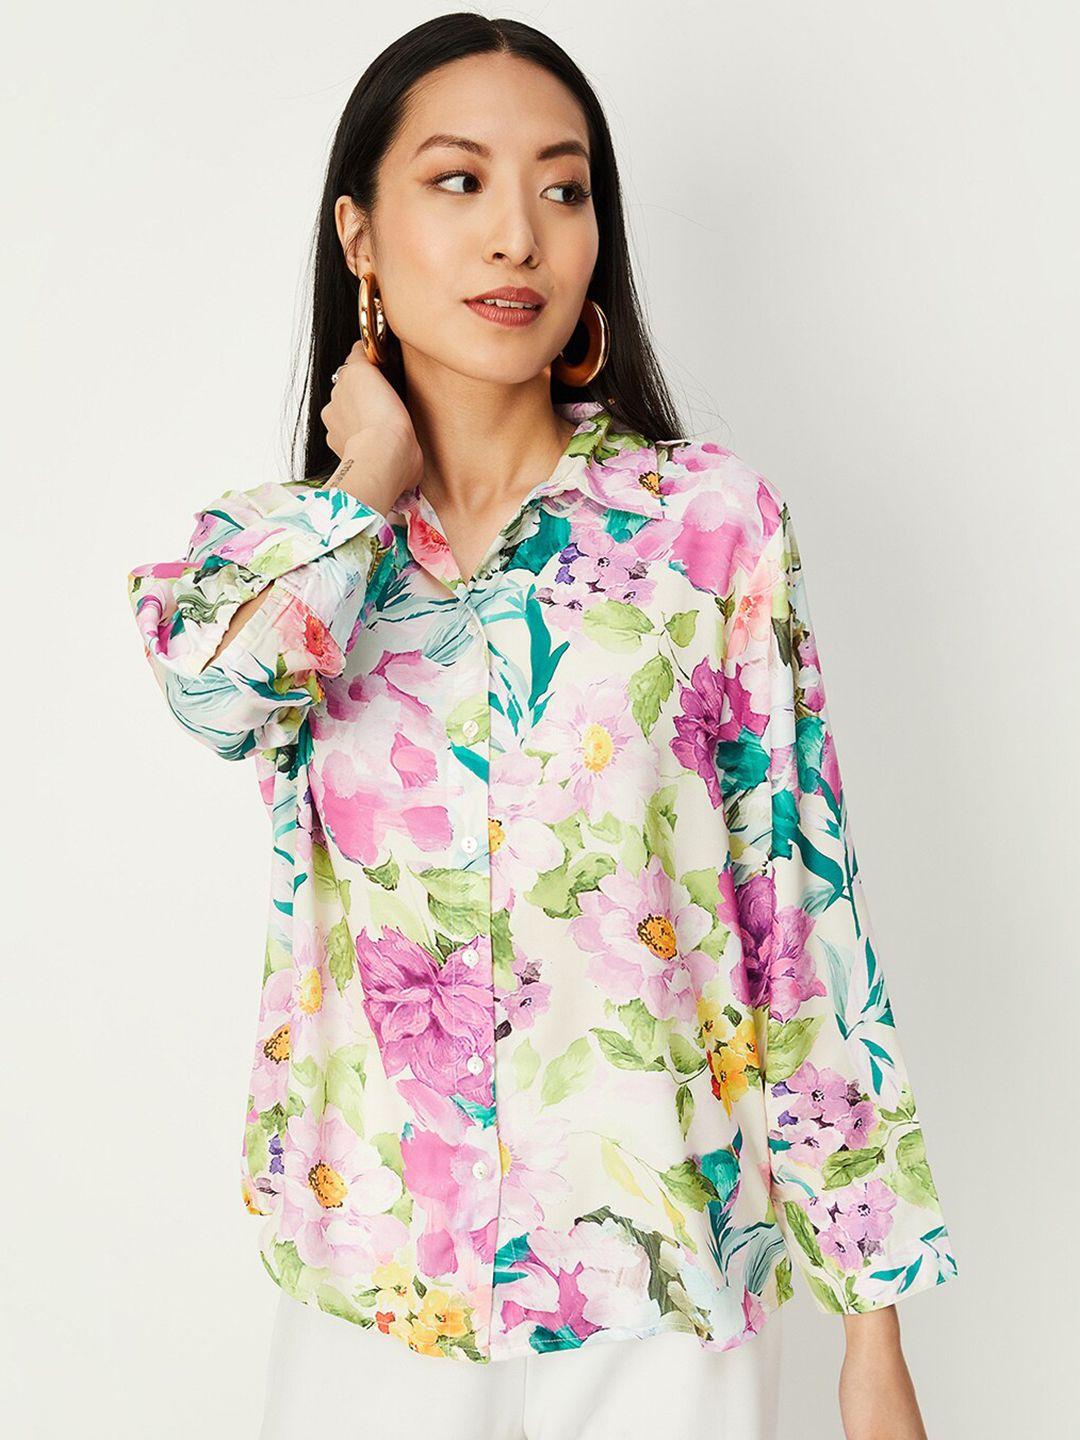 max floral printed shirt style top